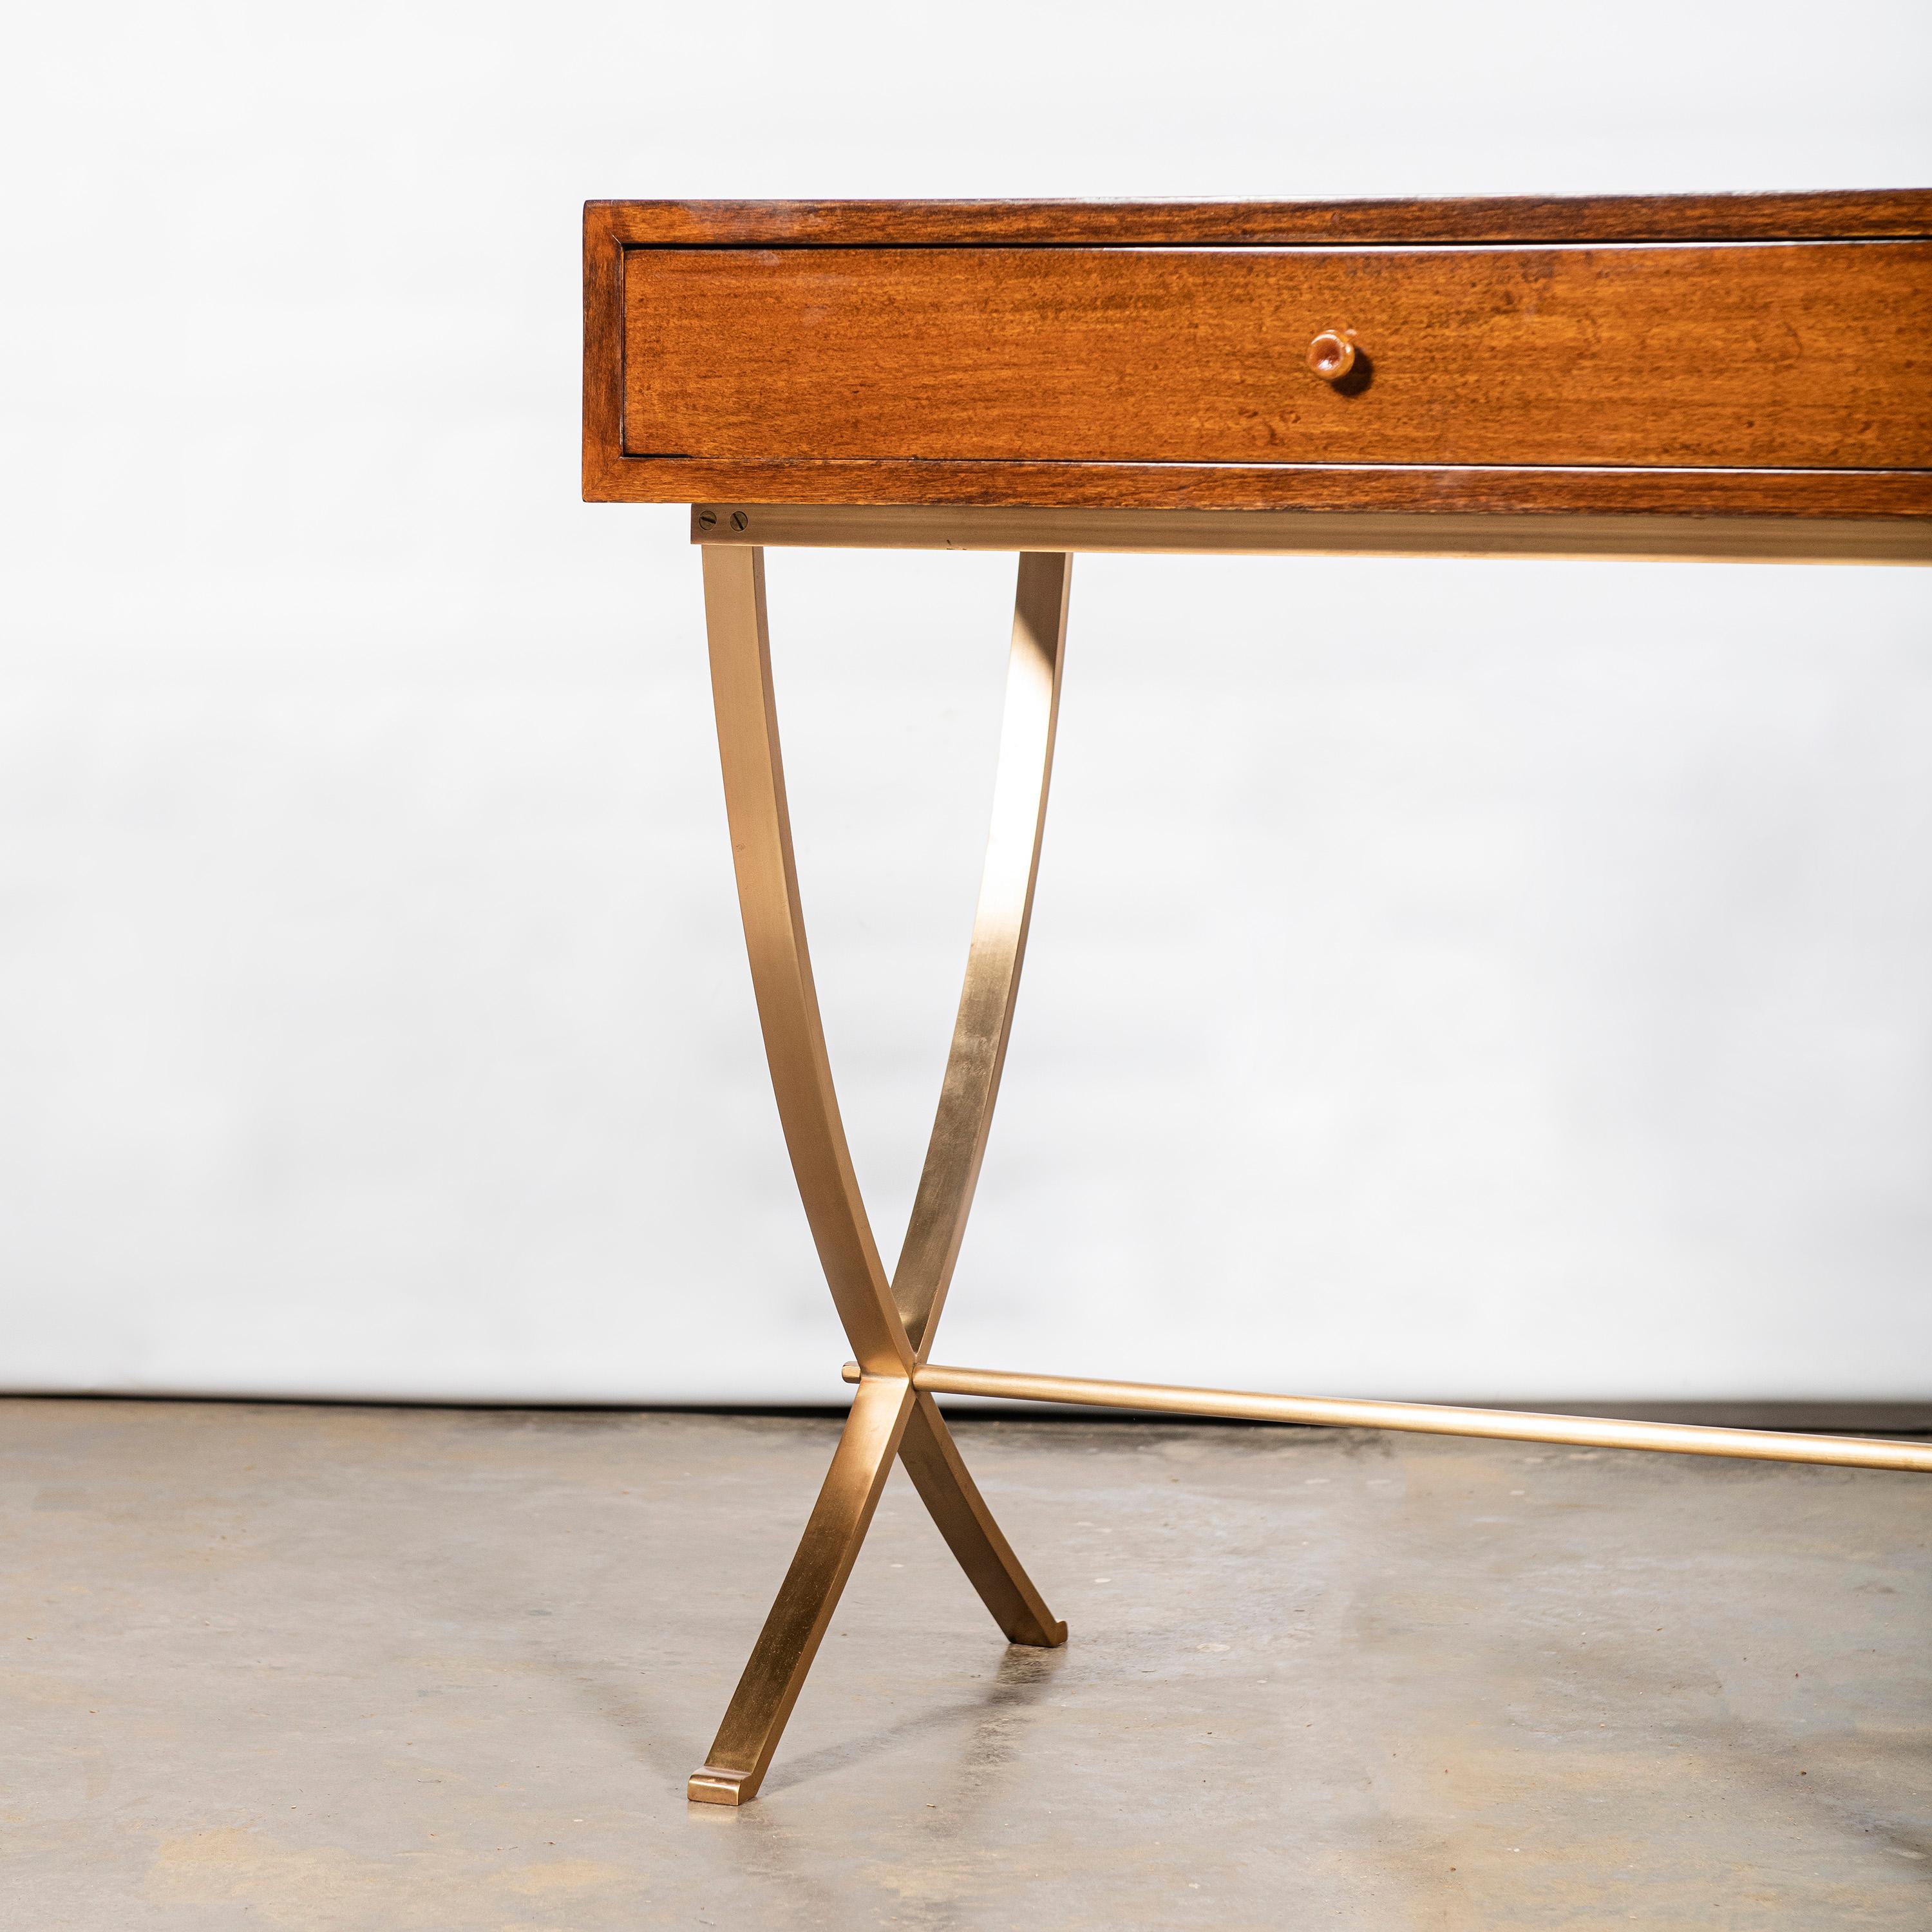 Argentine Wood and Bronze Console Table by Comte, Argentina, Buenos Aires, circa 1950 For Sale